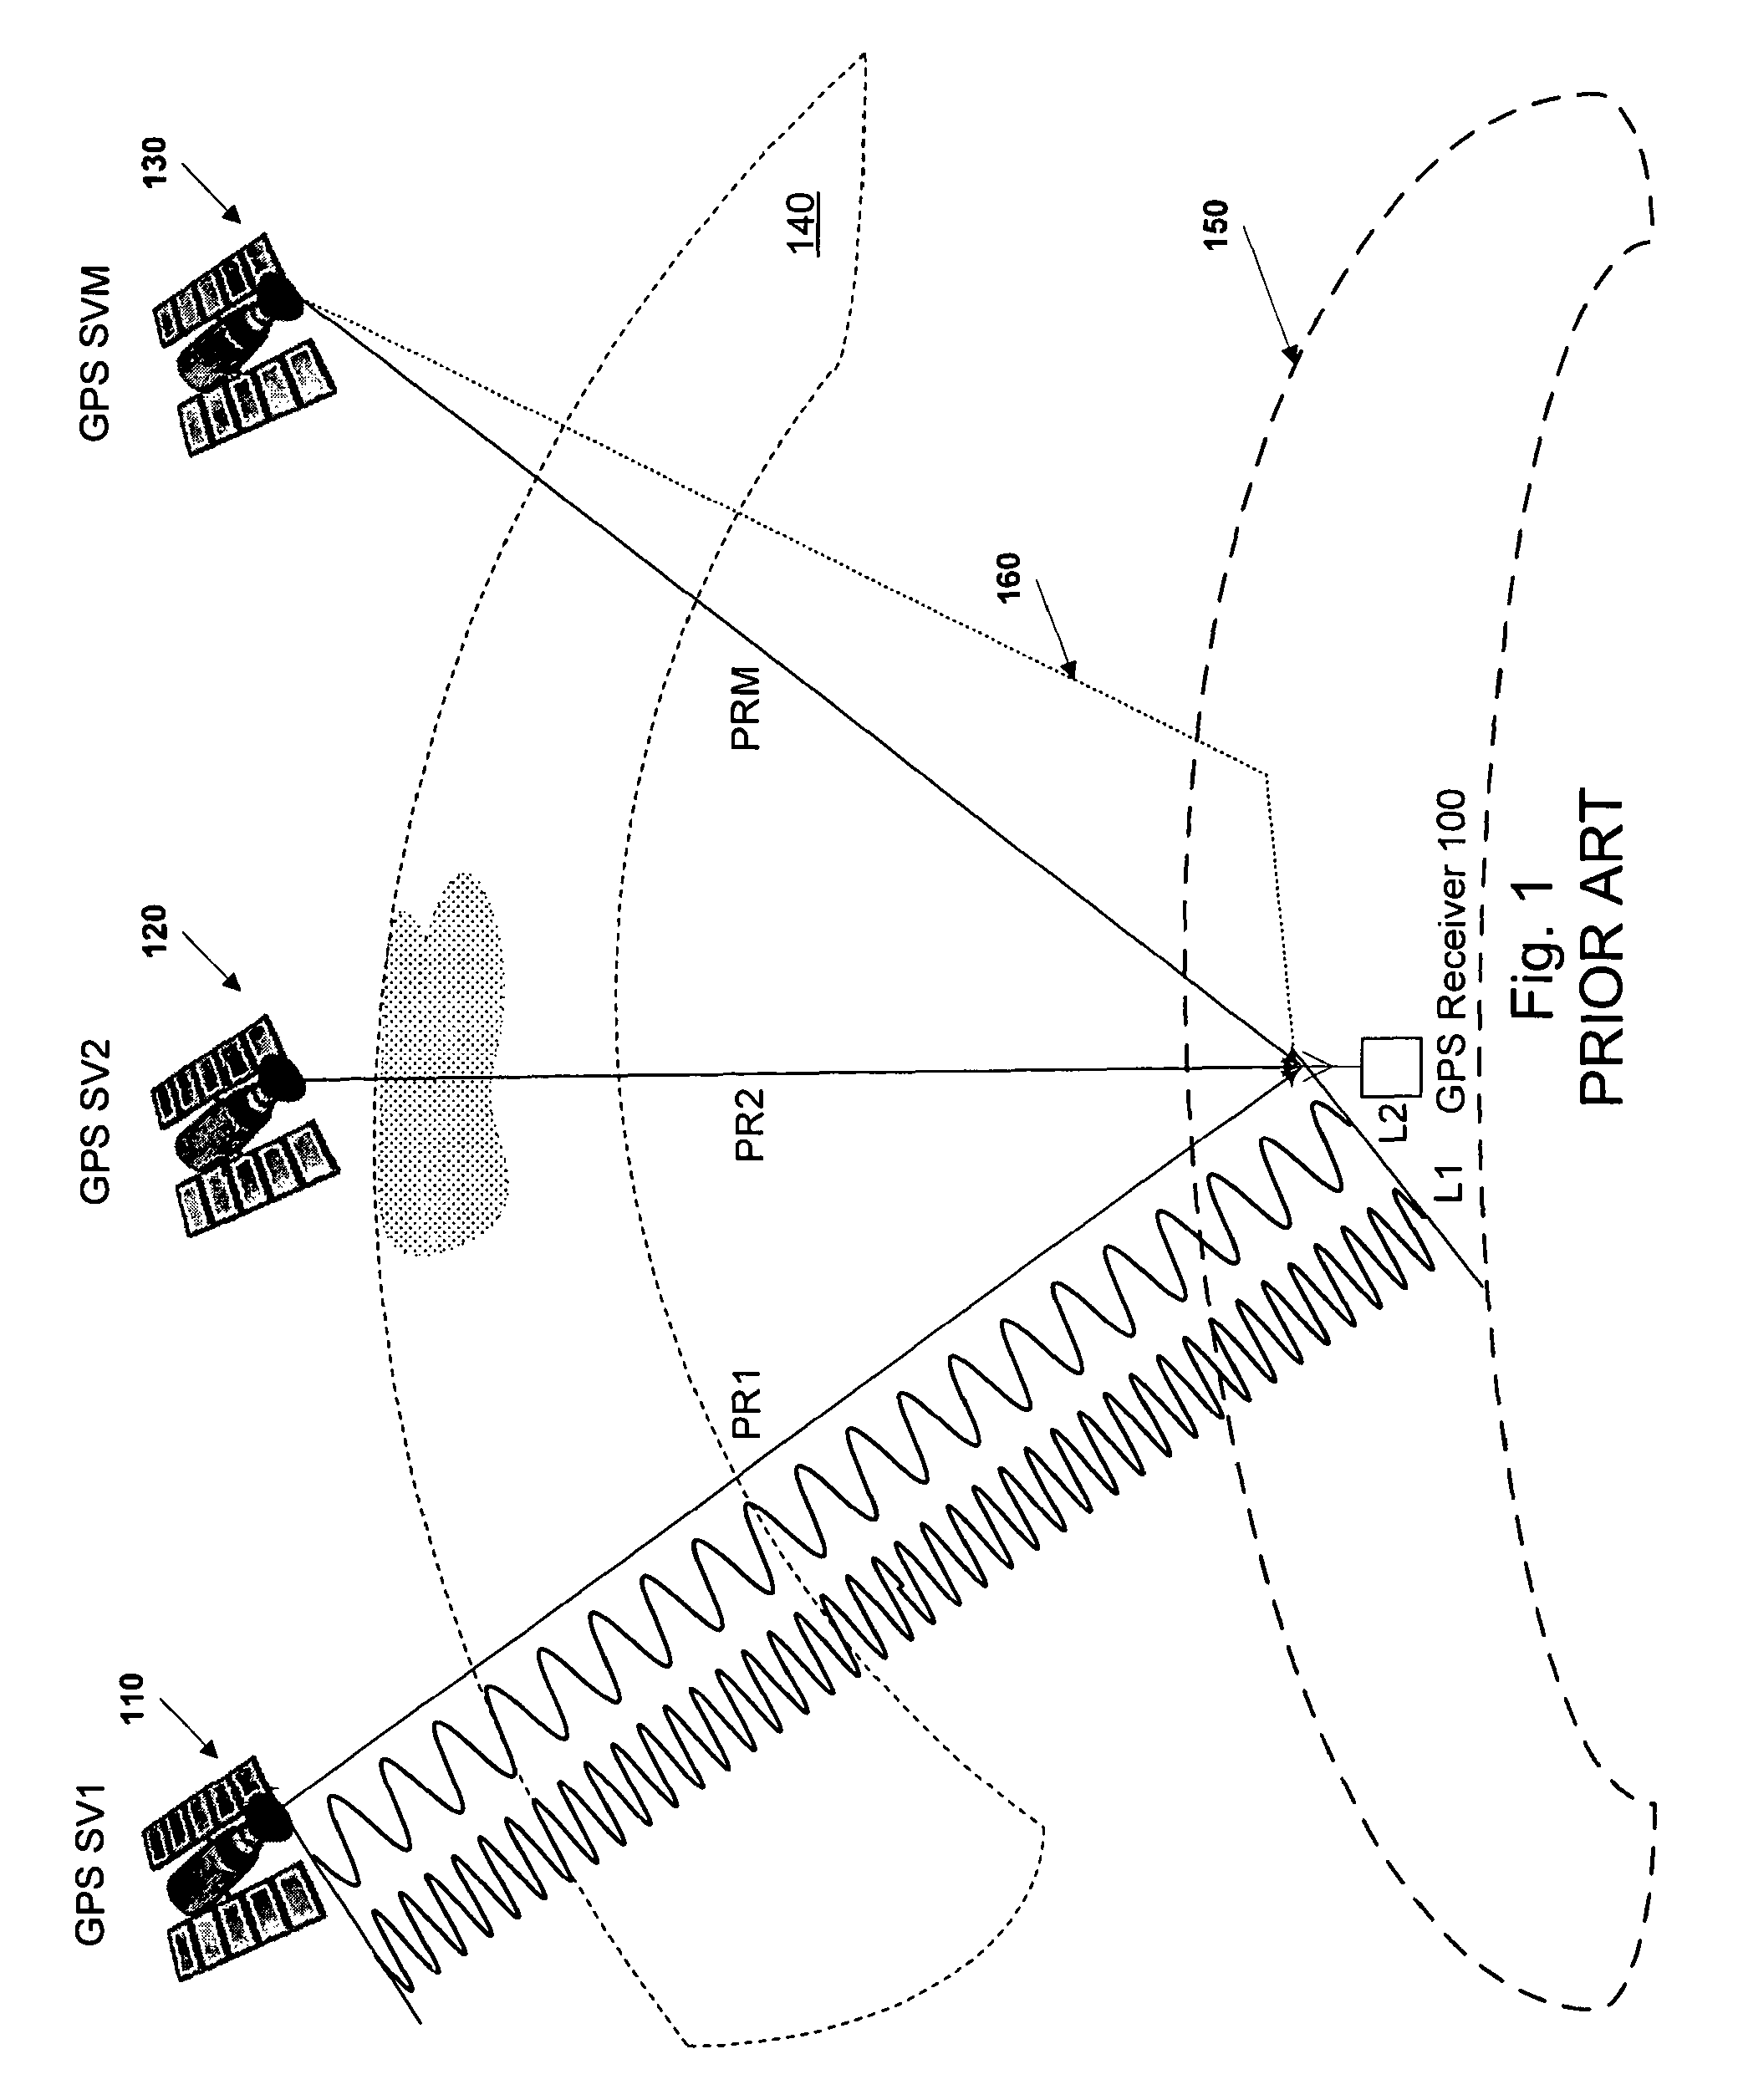 GNSS signal processing methods and apparatus